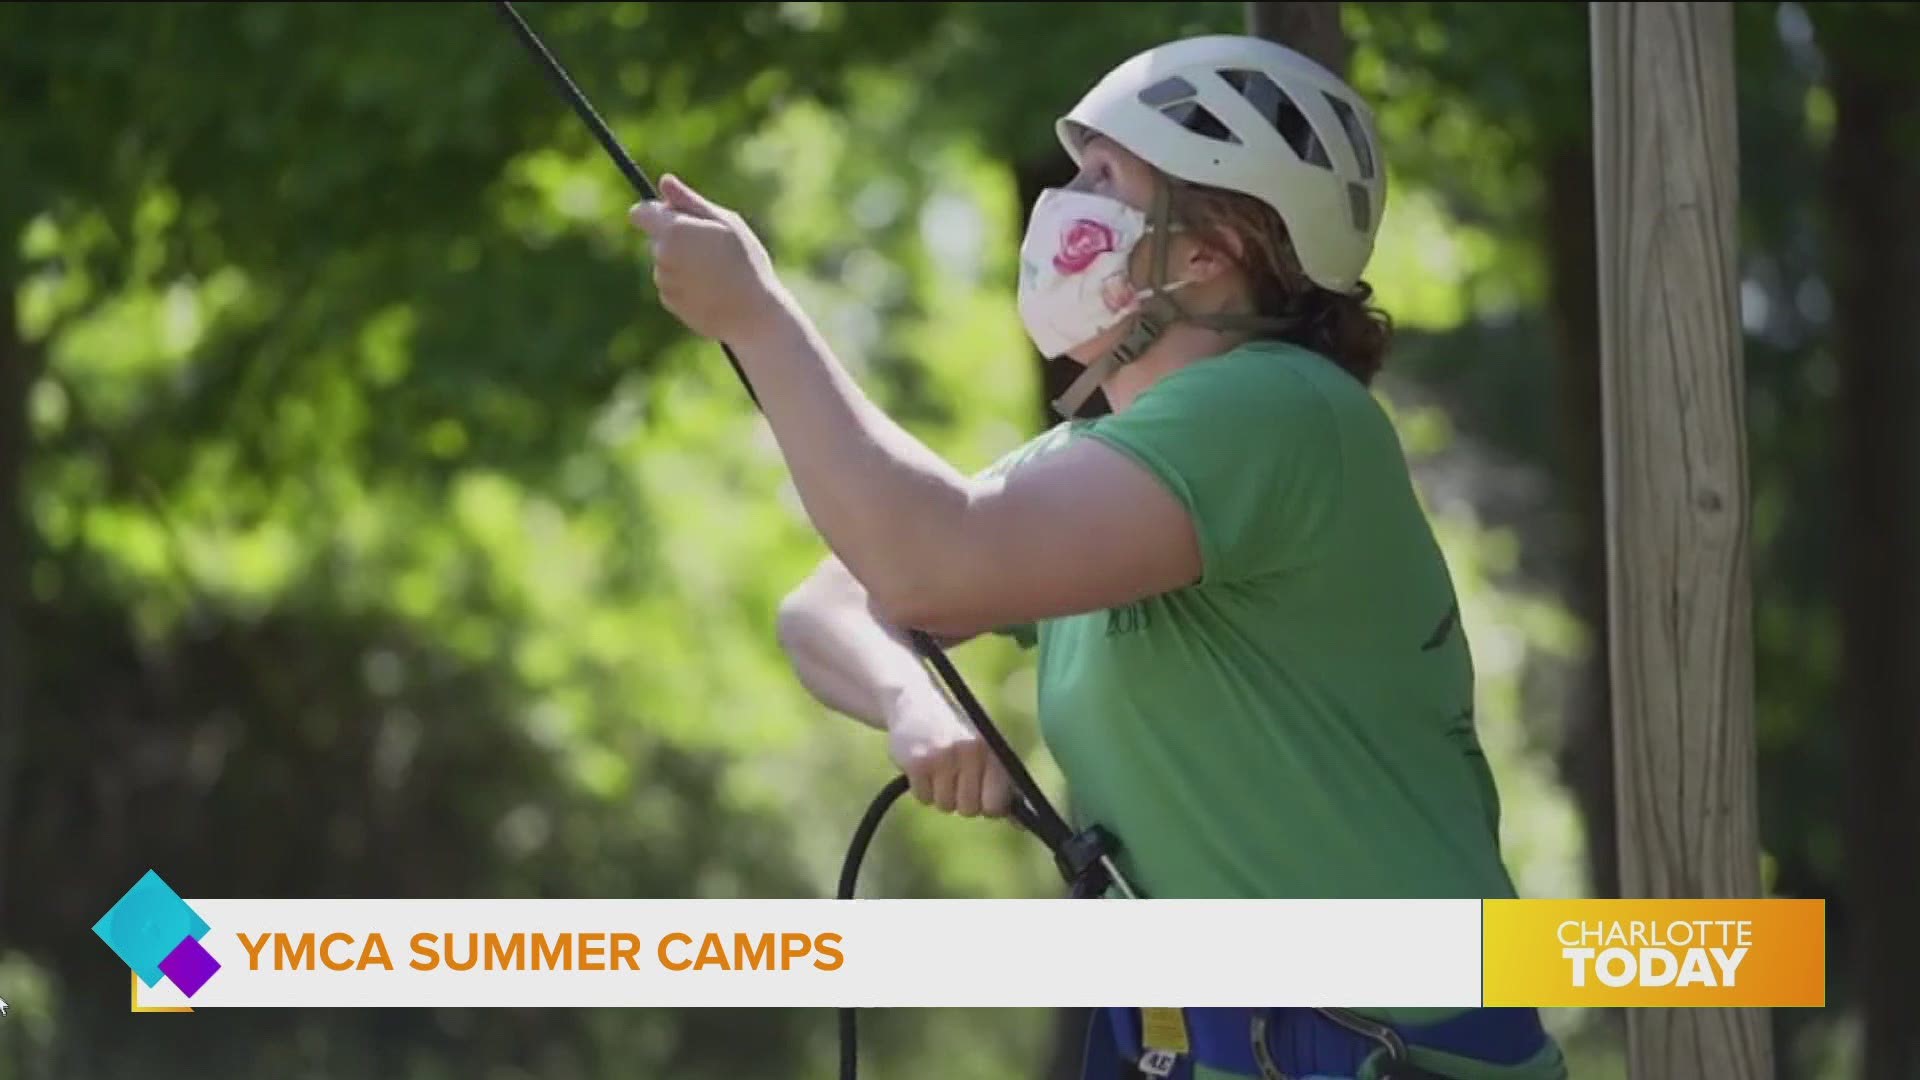 Find out more about spring and summer sports and summer camps for kids